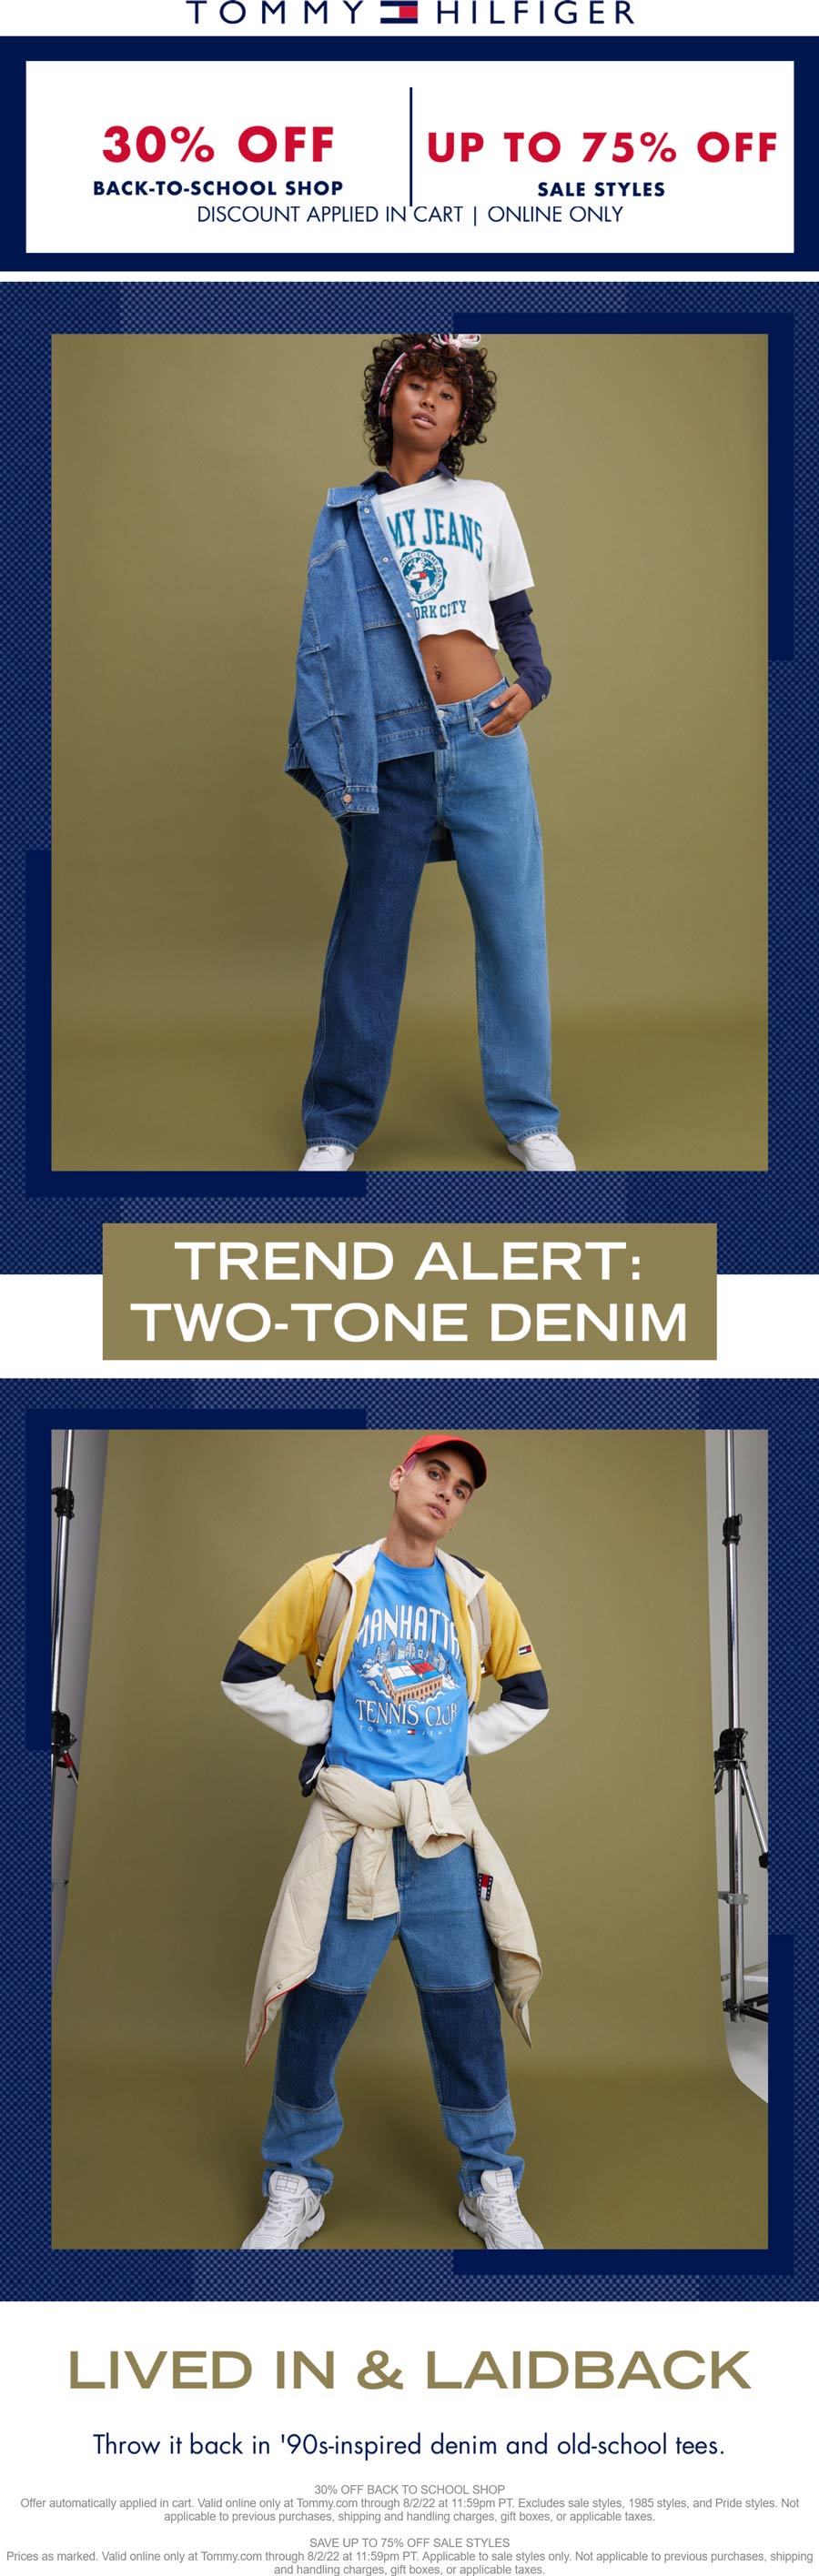 Tommy Hilfiger stores Coupon  30% off & more online at Tommy Hilfiger #tommyhilfiger 